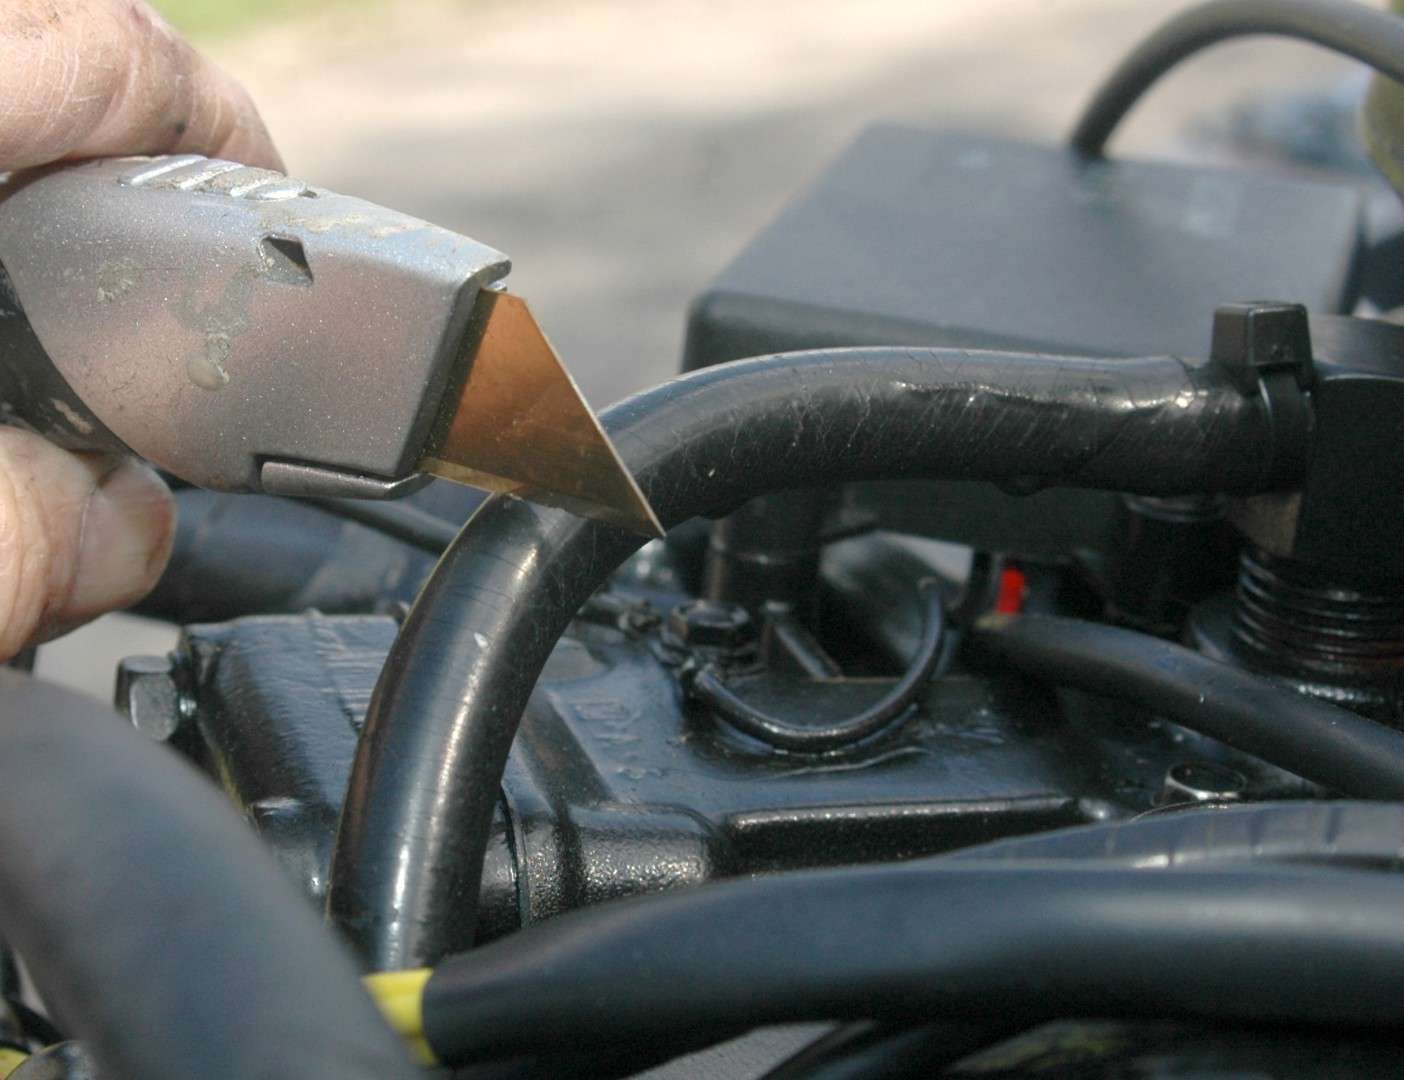 <em>INSTALLING A WATER PRESSURE GAUGE</em>
<br>The best place to cut into the engine's cooling system was this water line at the top fo the engine in the V between the cylinder heads.